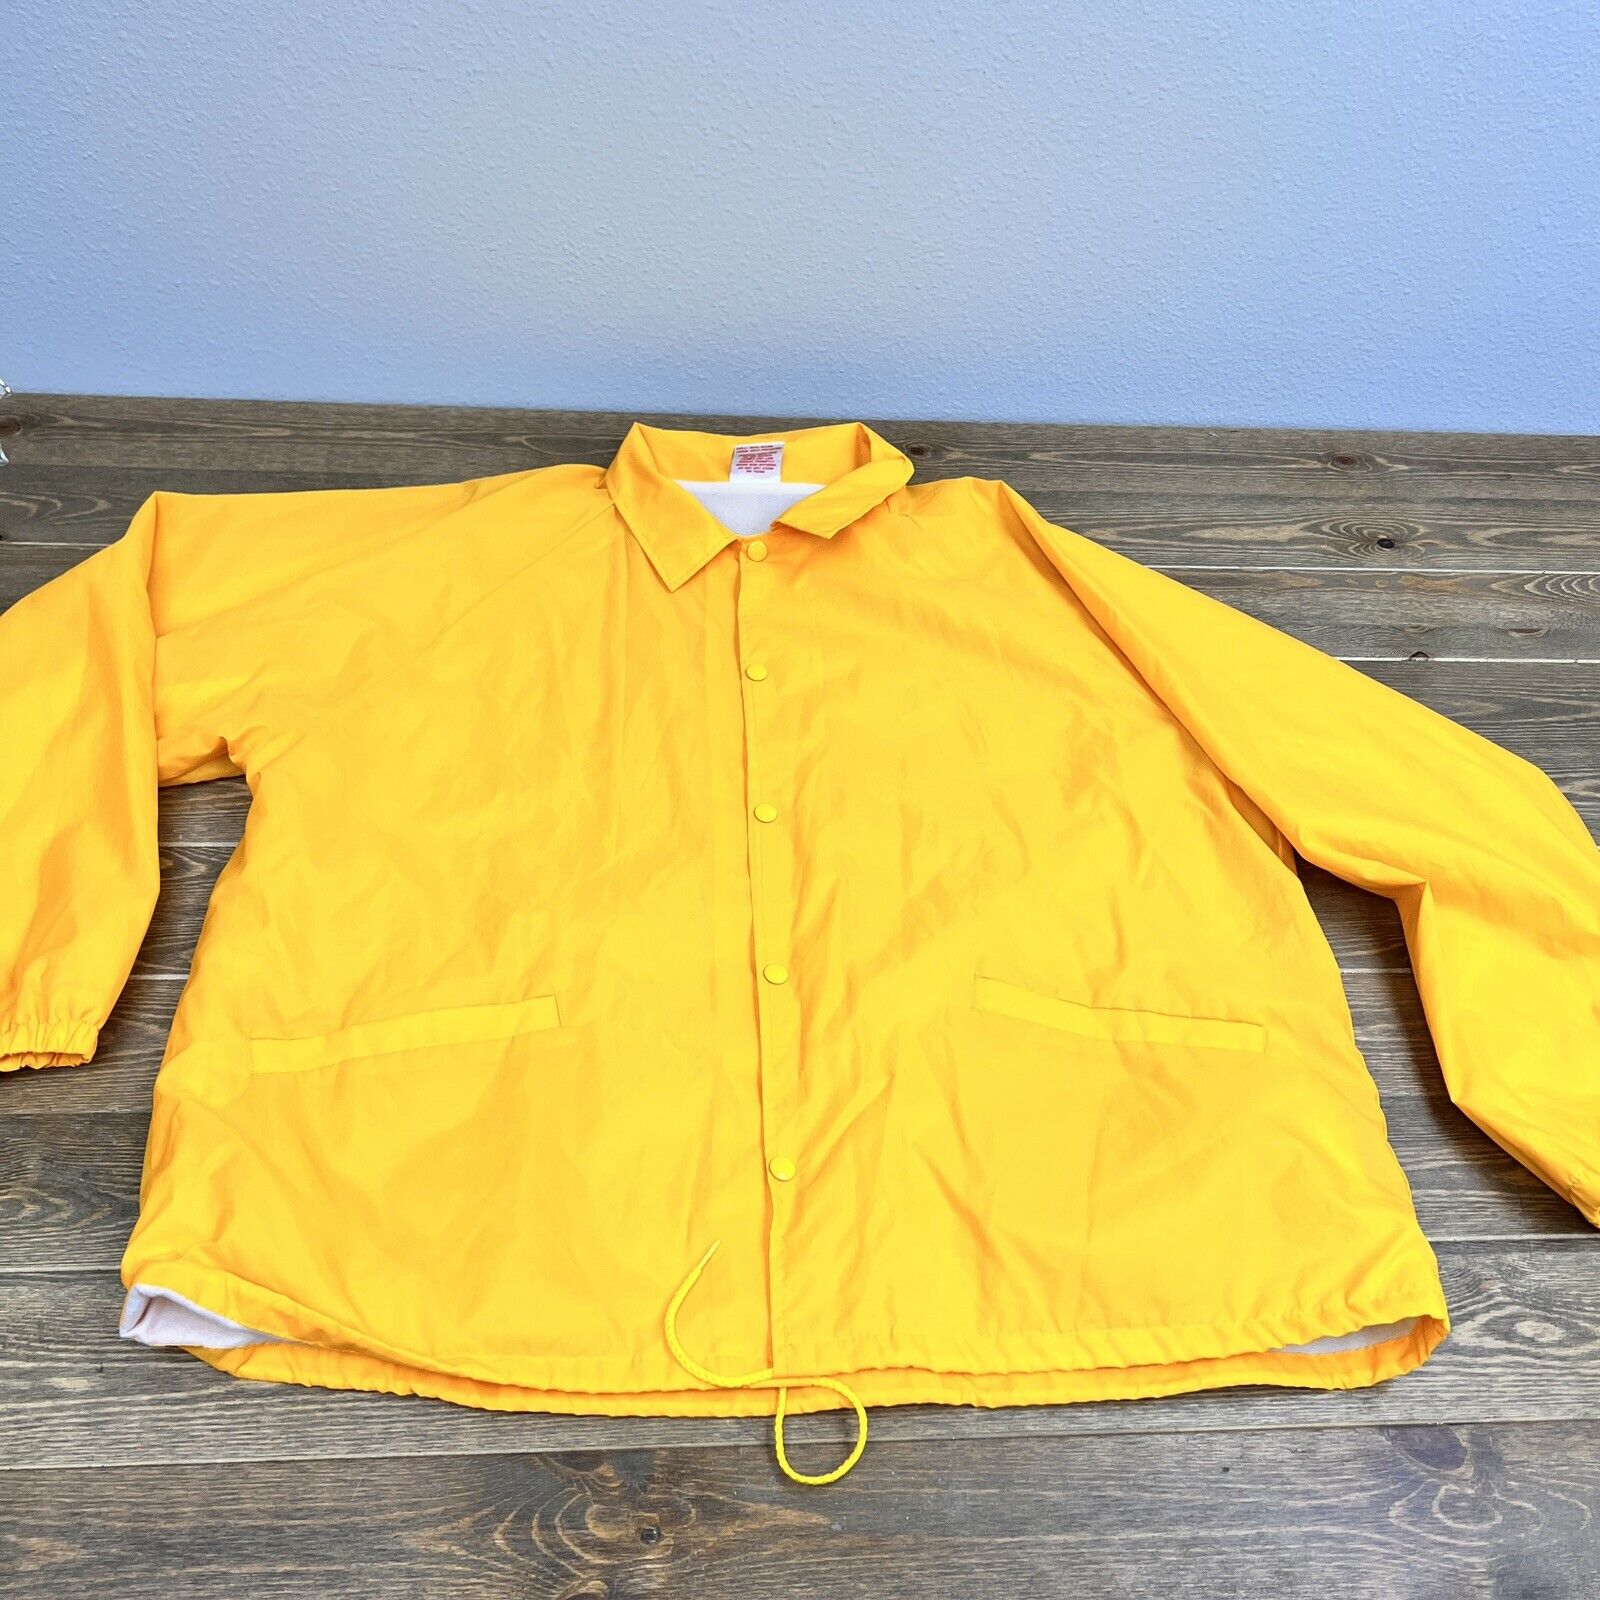 Vintage 80s Cardinal Coach Jacket Yellow 2XL made in USA